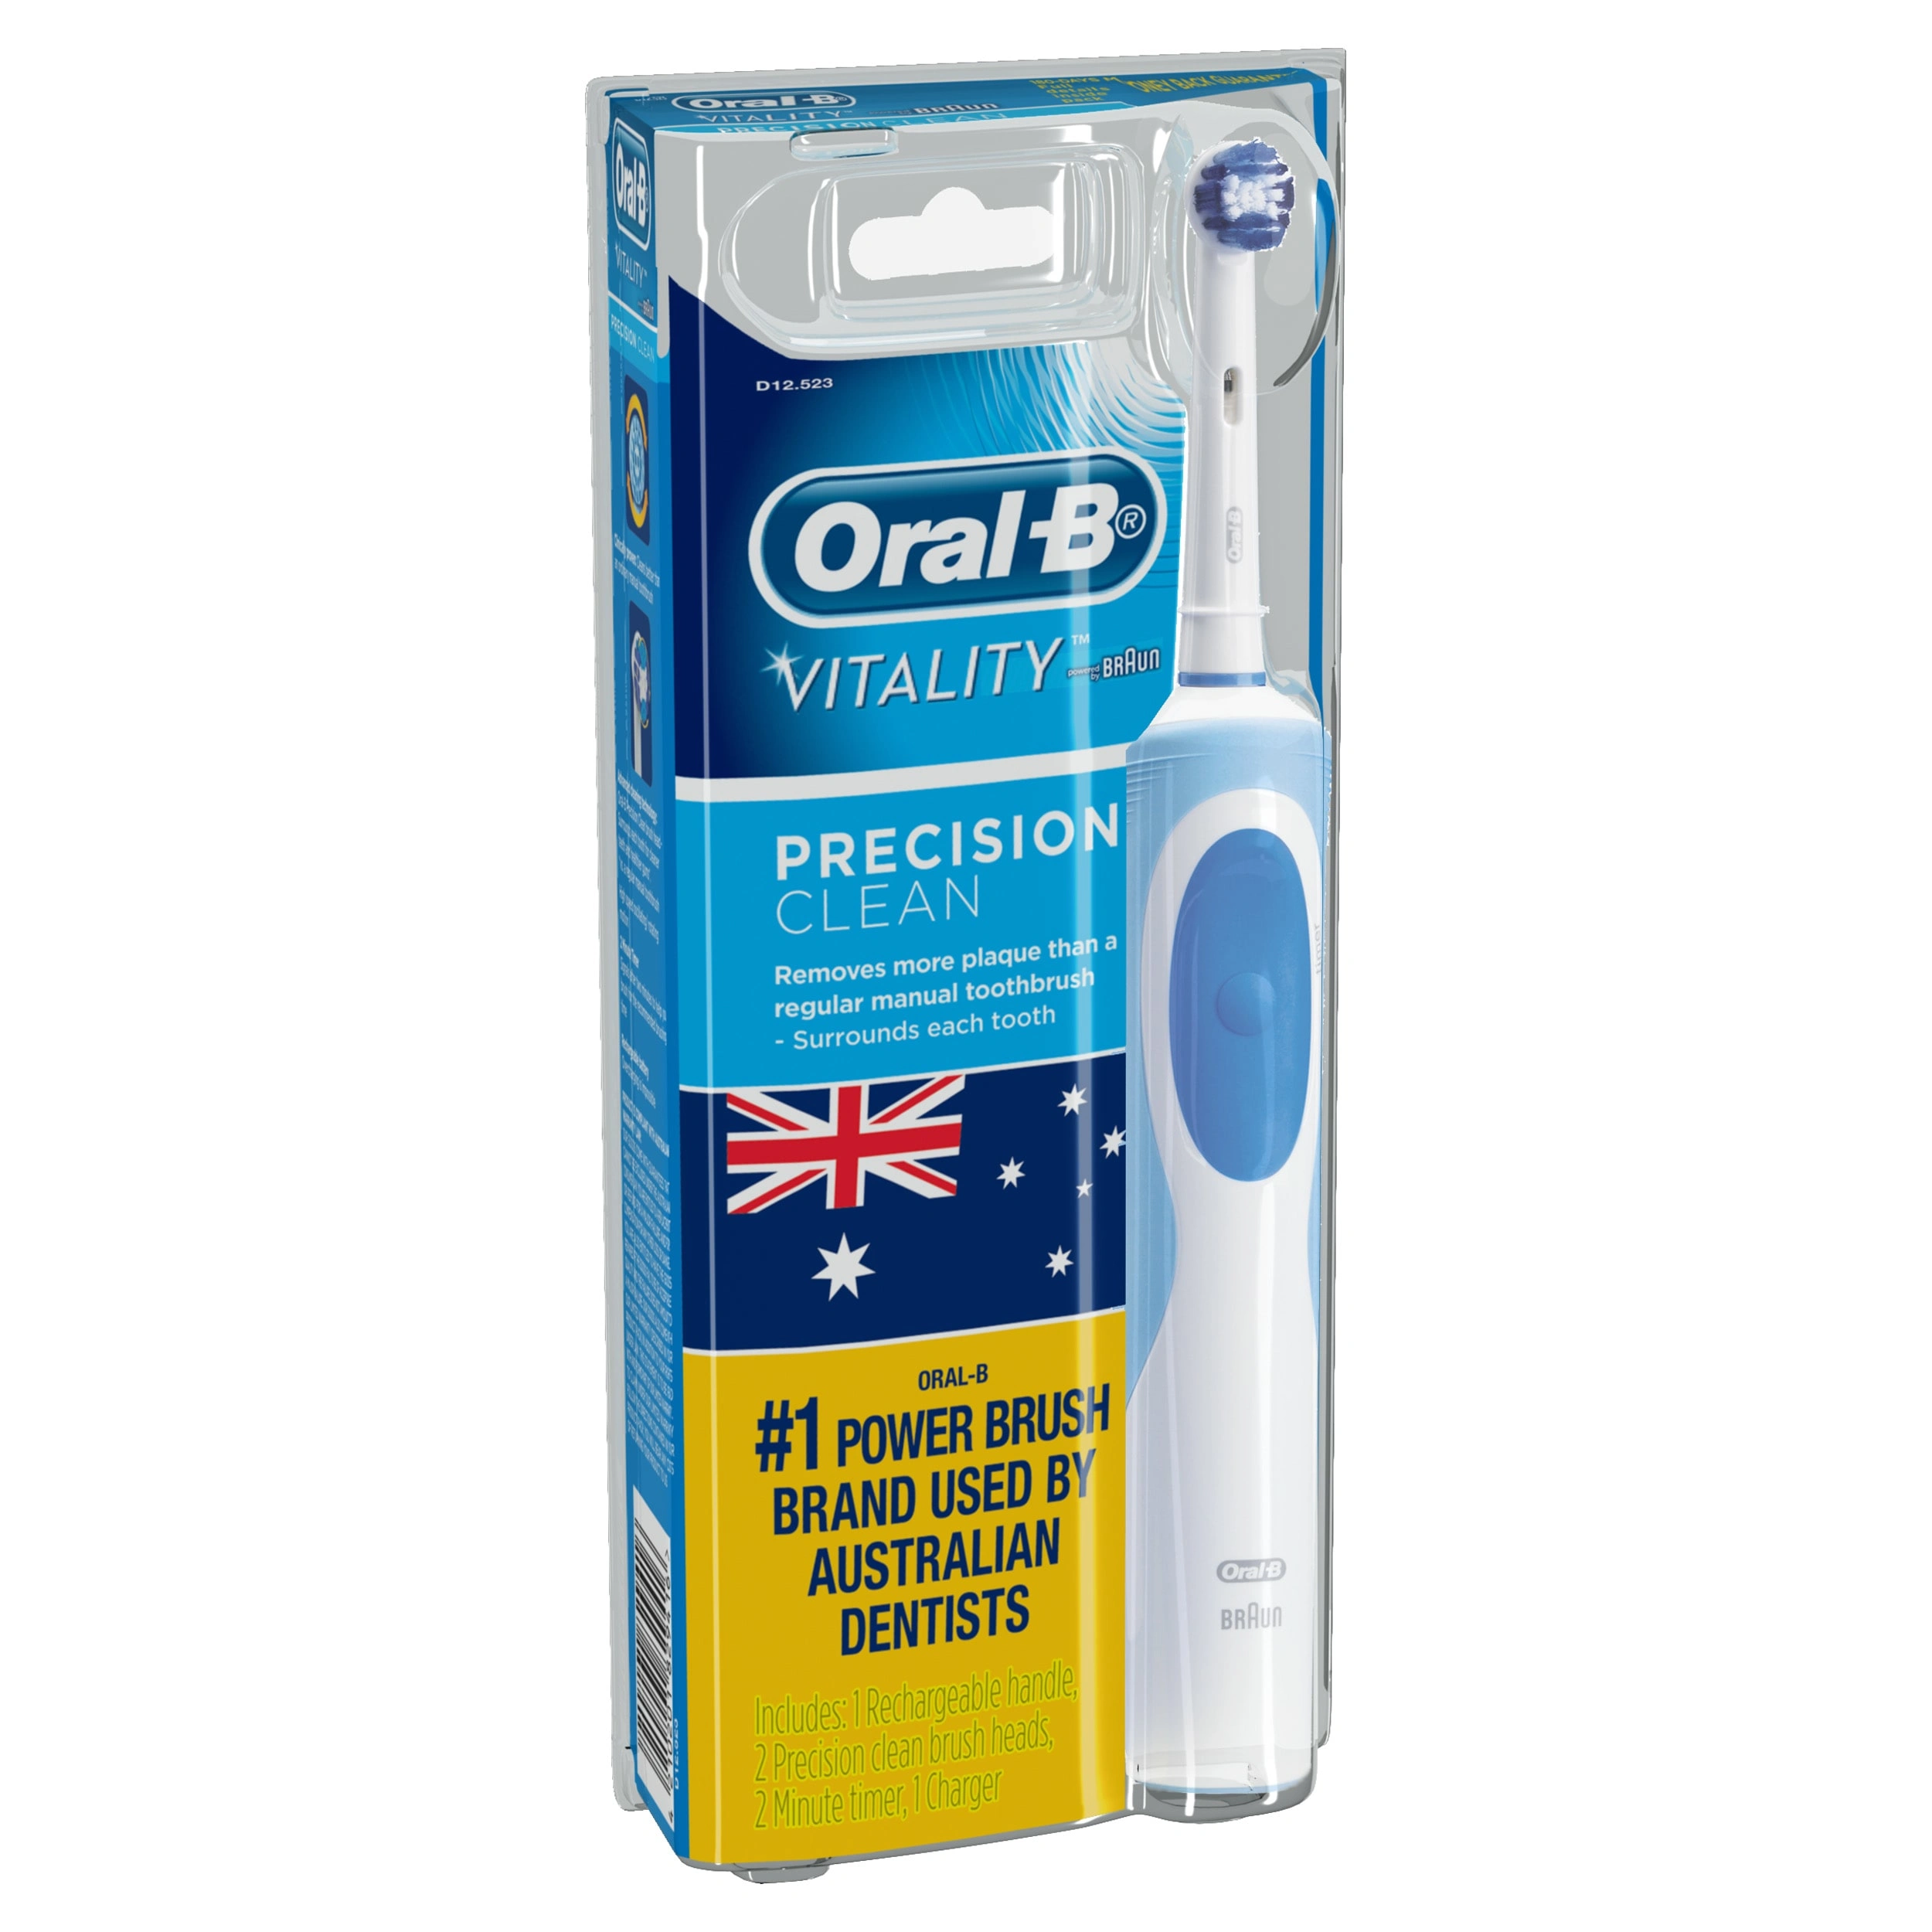 OralB Vitality Precision Clean Electric Toothbrush